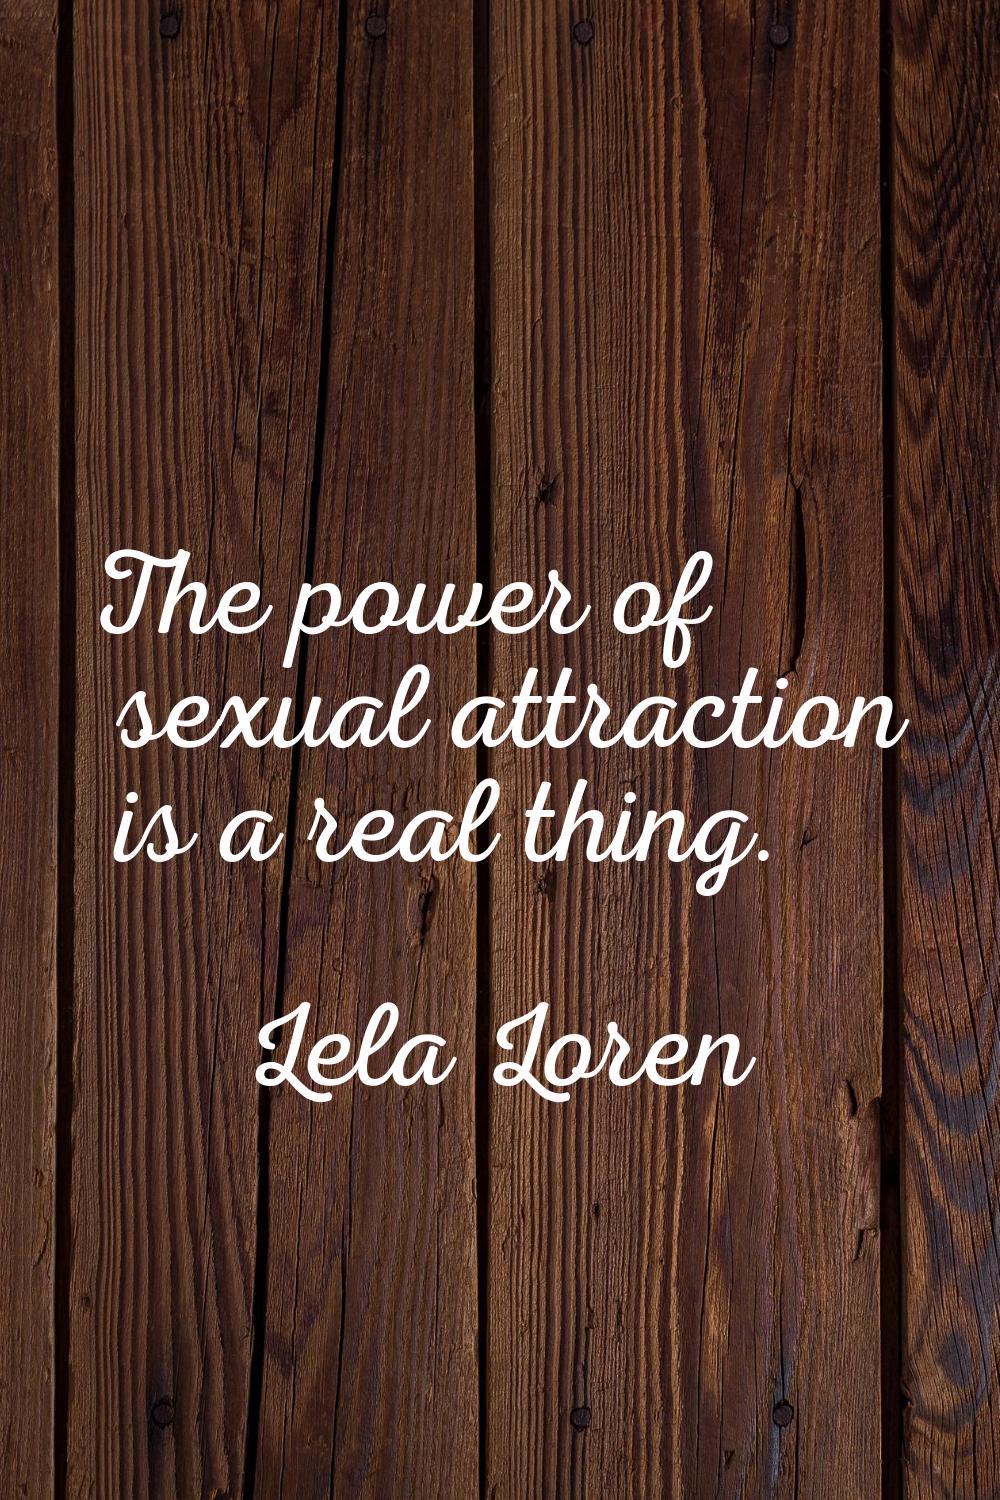 The power of sexual attraction is a real thing.